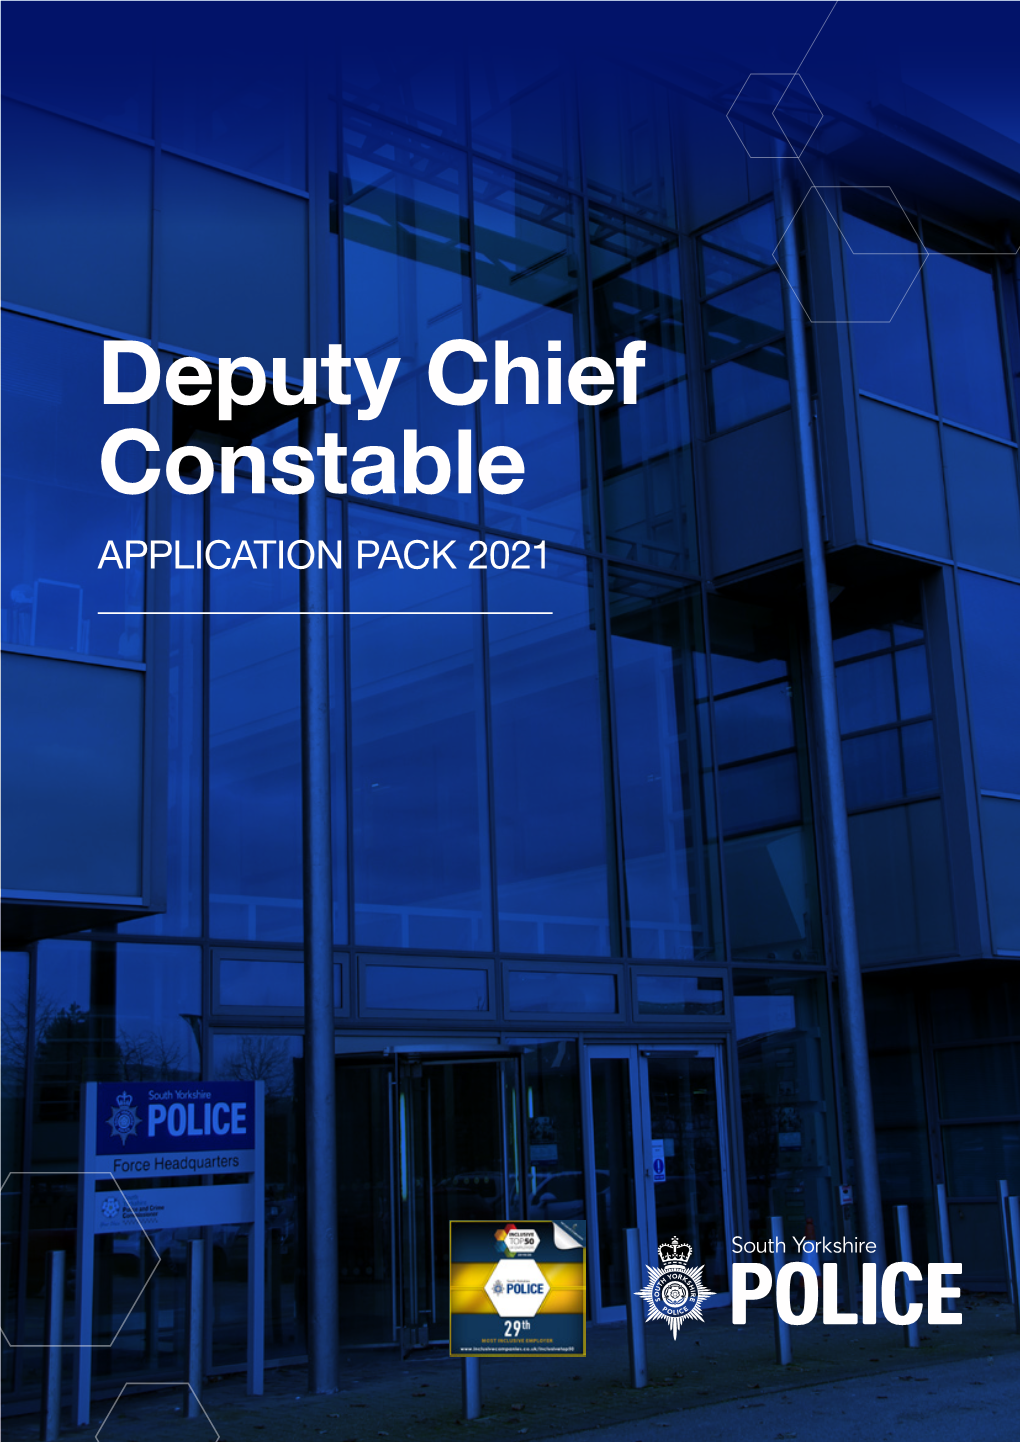 Deputy Chief Constable APPLICATION PACK 2021